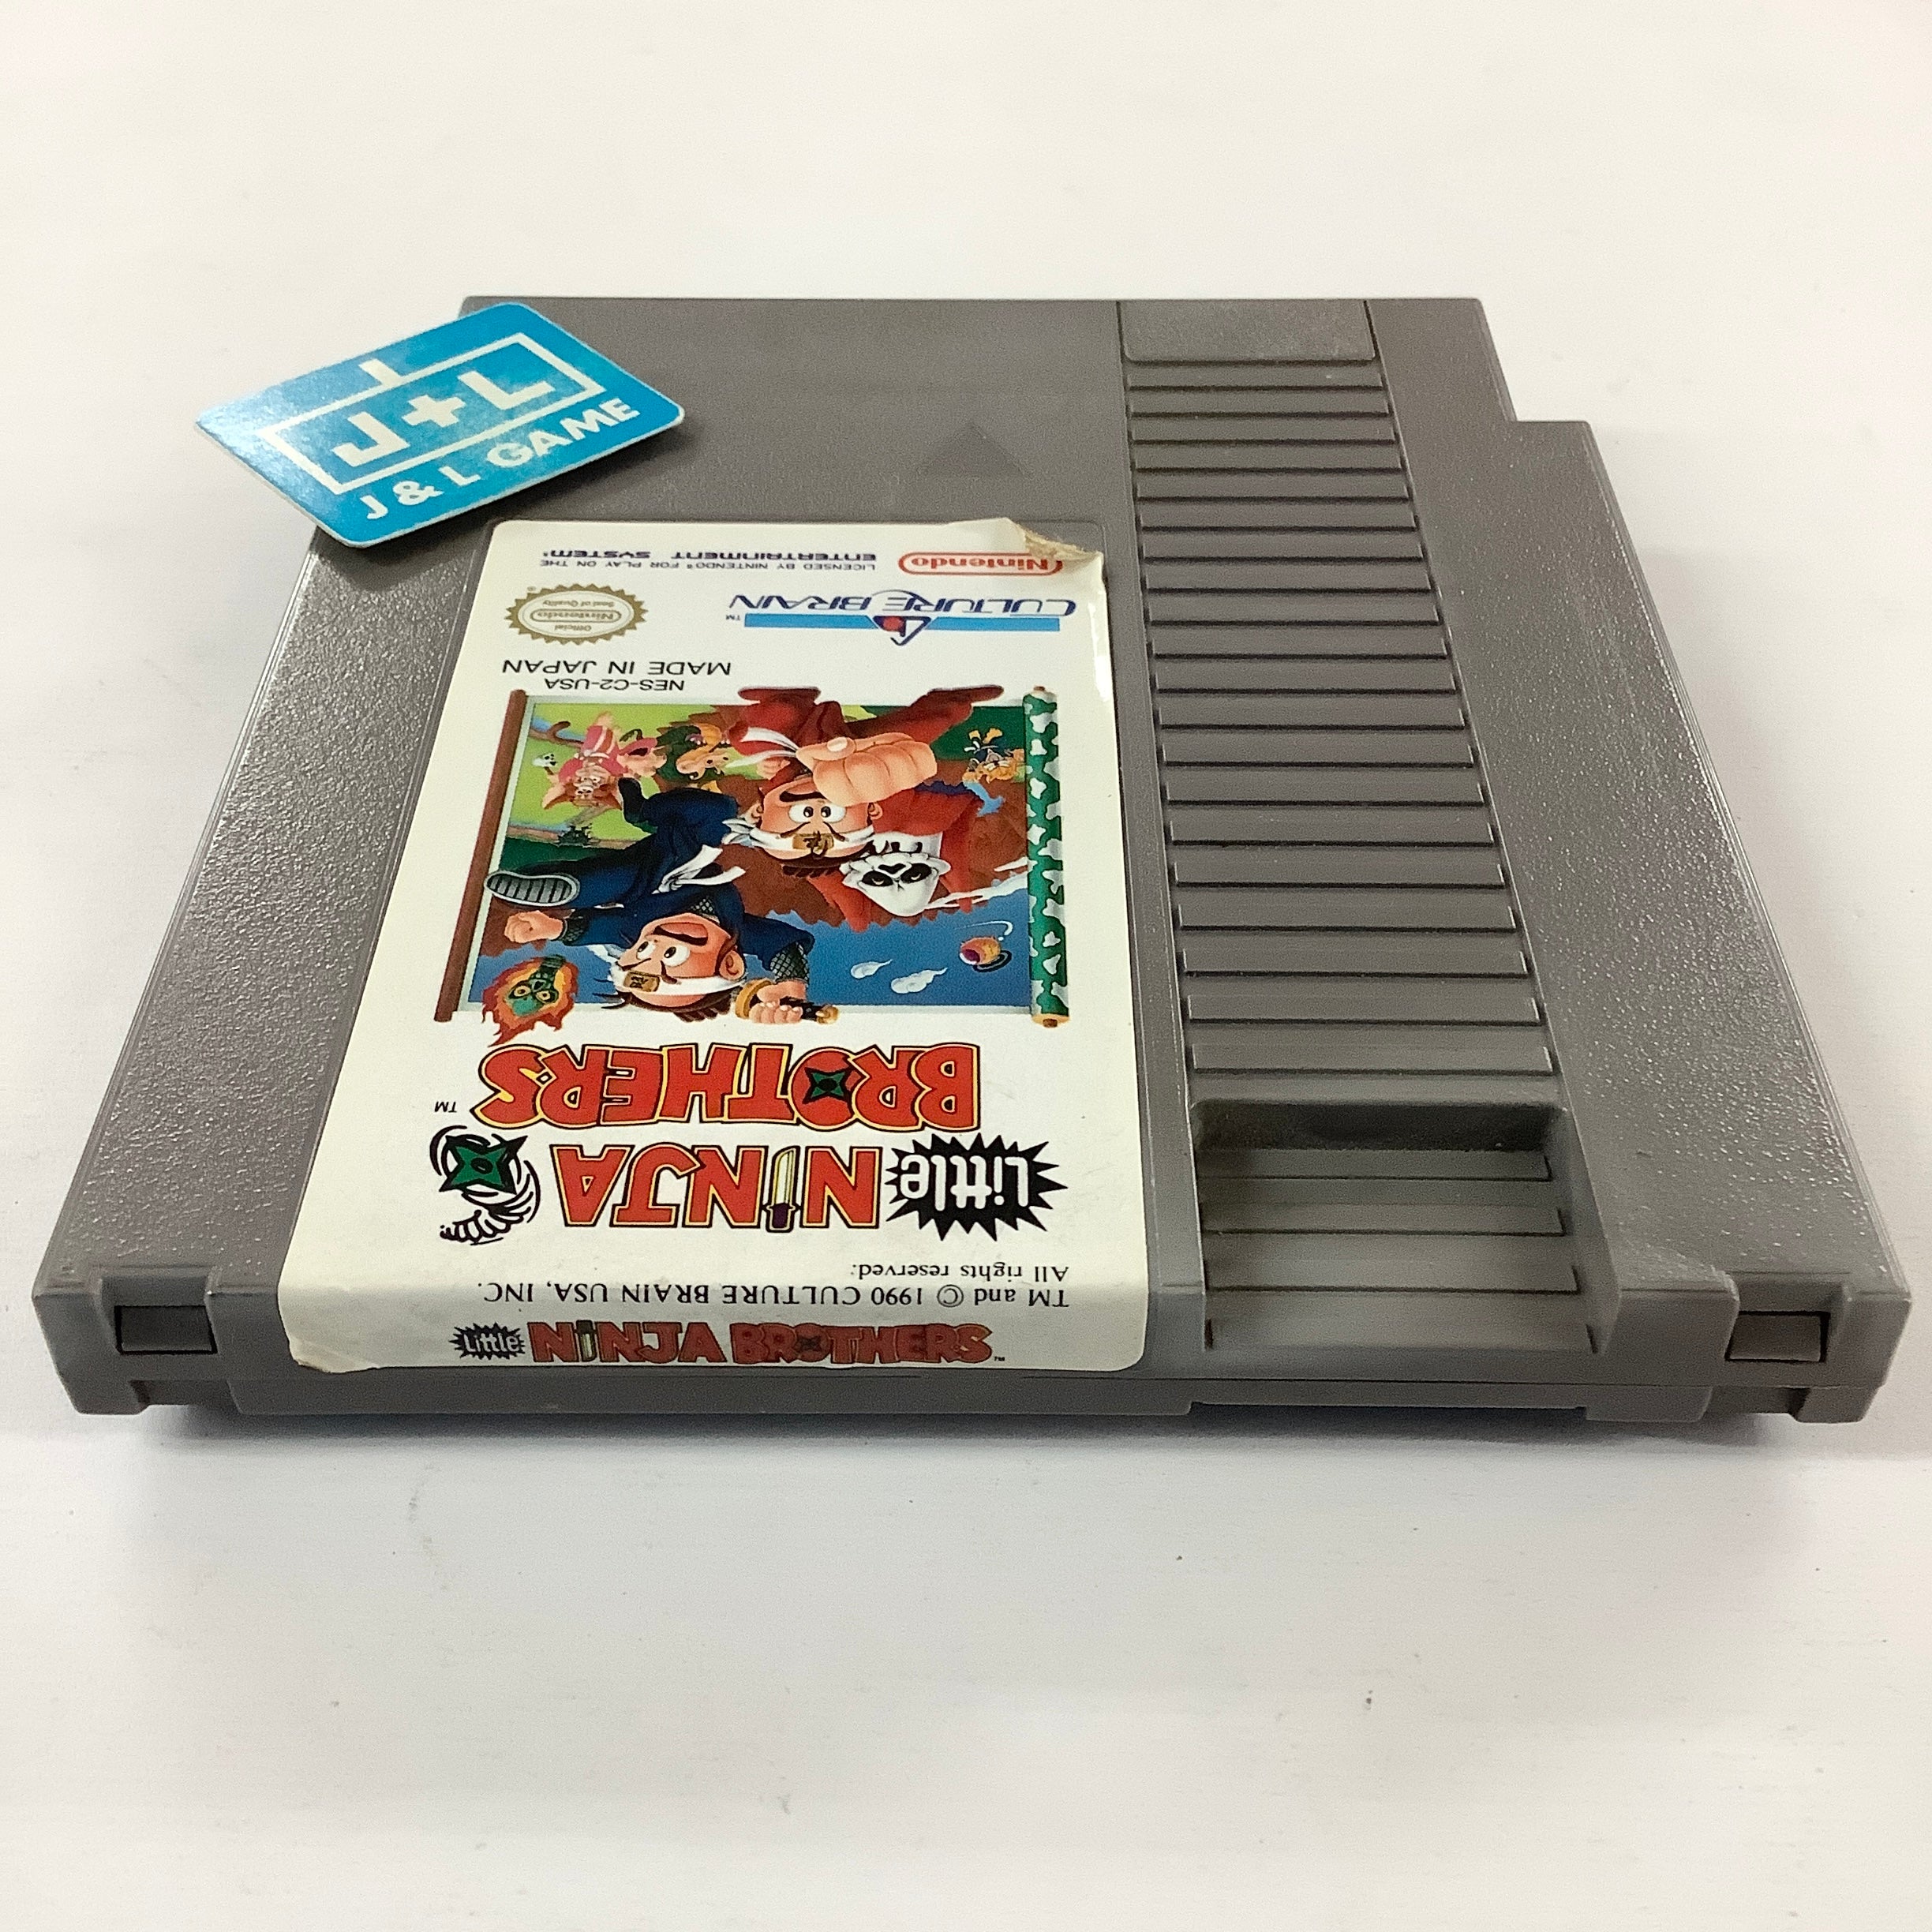 Little Ninja Brothers - (NES) Nintendo Entertainment System [Pre-Owned] Video Games Culture Brain   